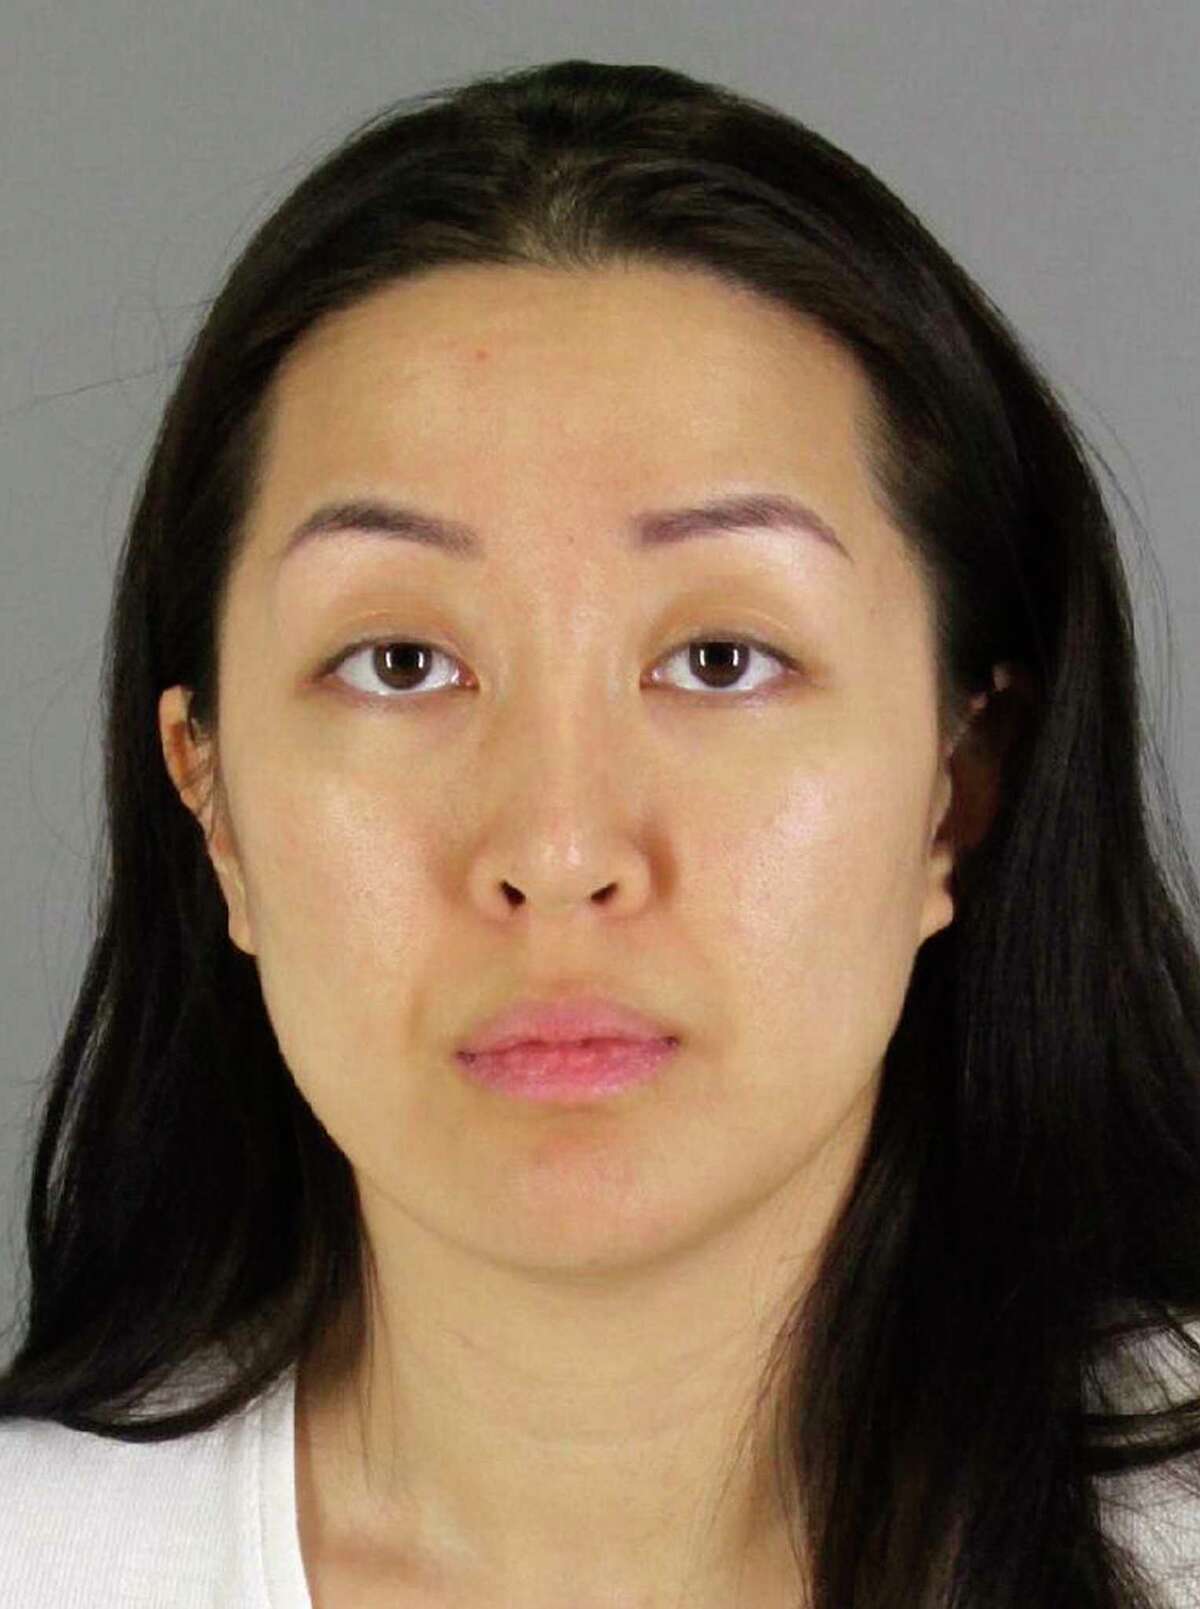 FILE - This undated booking photo provided by the San Mateo County, Calif., Sheriff's Office shows Tiffany Li. After deliberating for 12 days, jurors said Friday, Nov. 15, 2019 that Li is not guilty of conspiring with her boyfriend to kill 27-year-old Keith Green in 2016. (San Mateo County Sheriff's Office via AP, File)